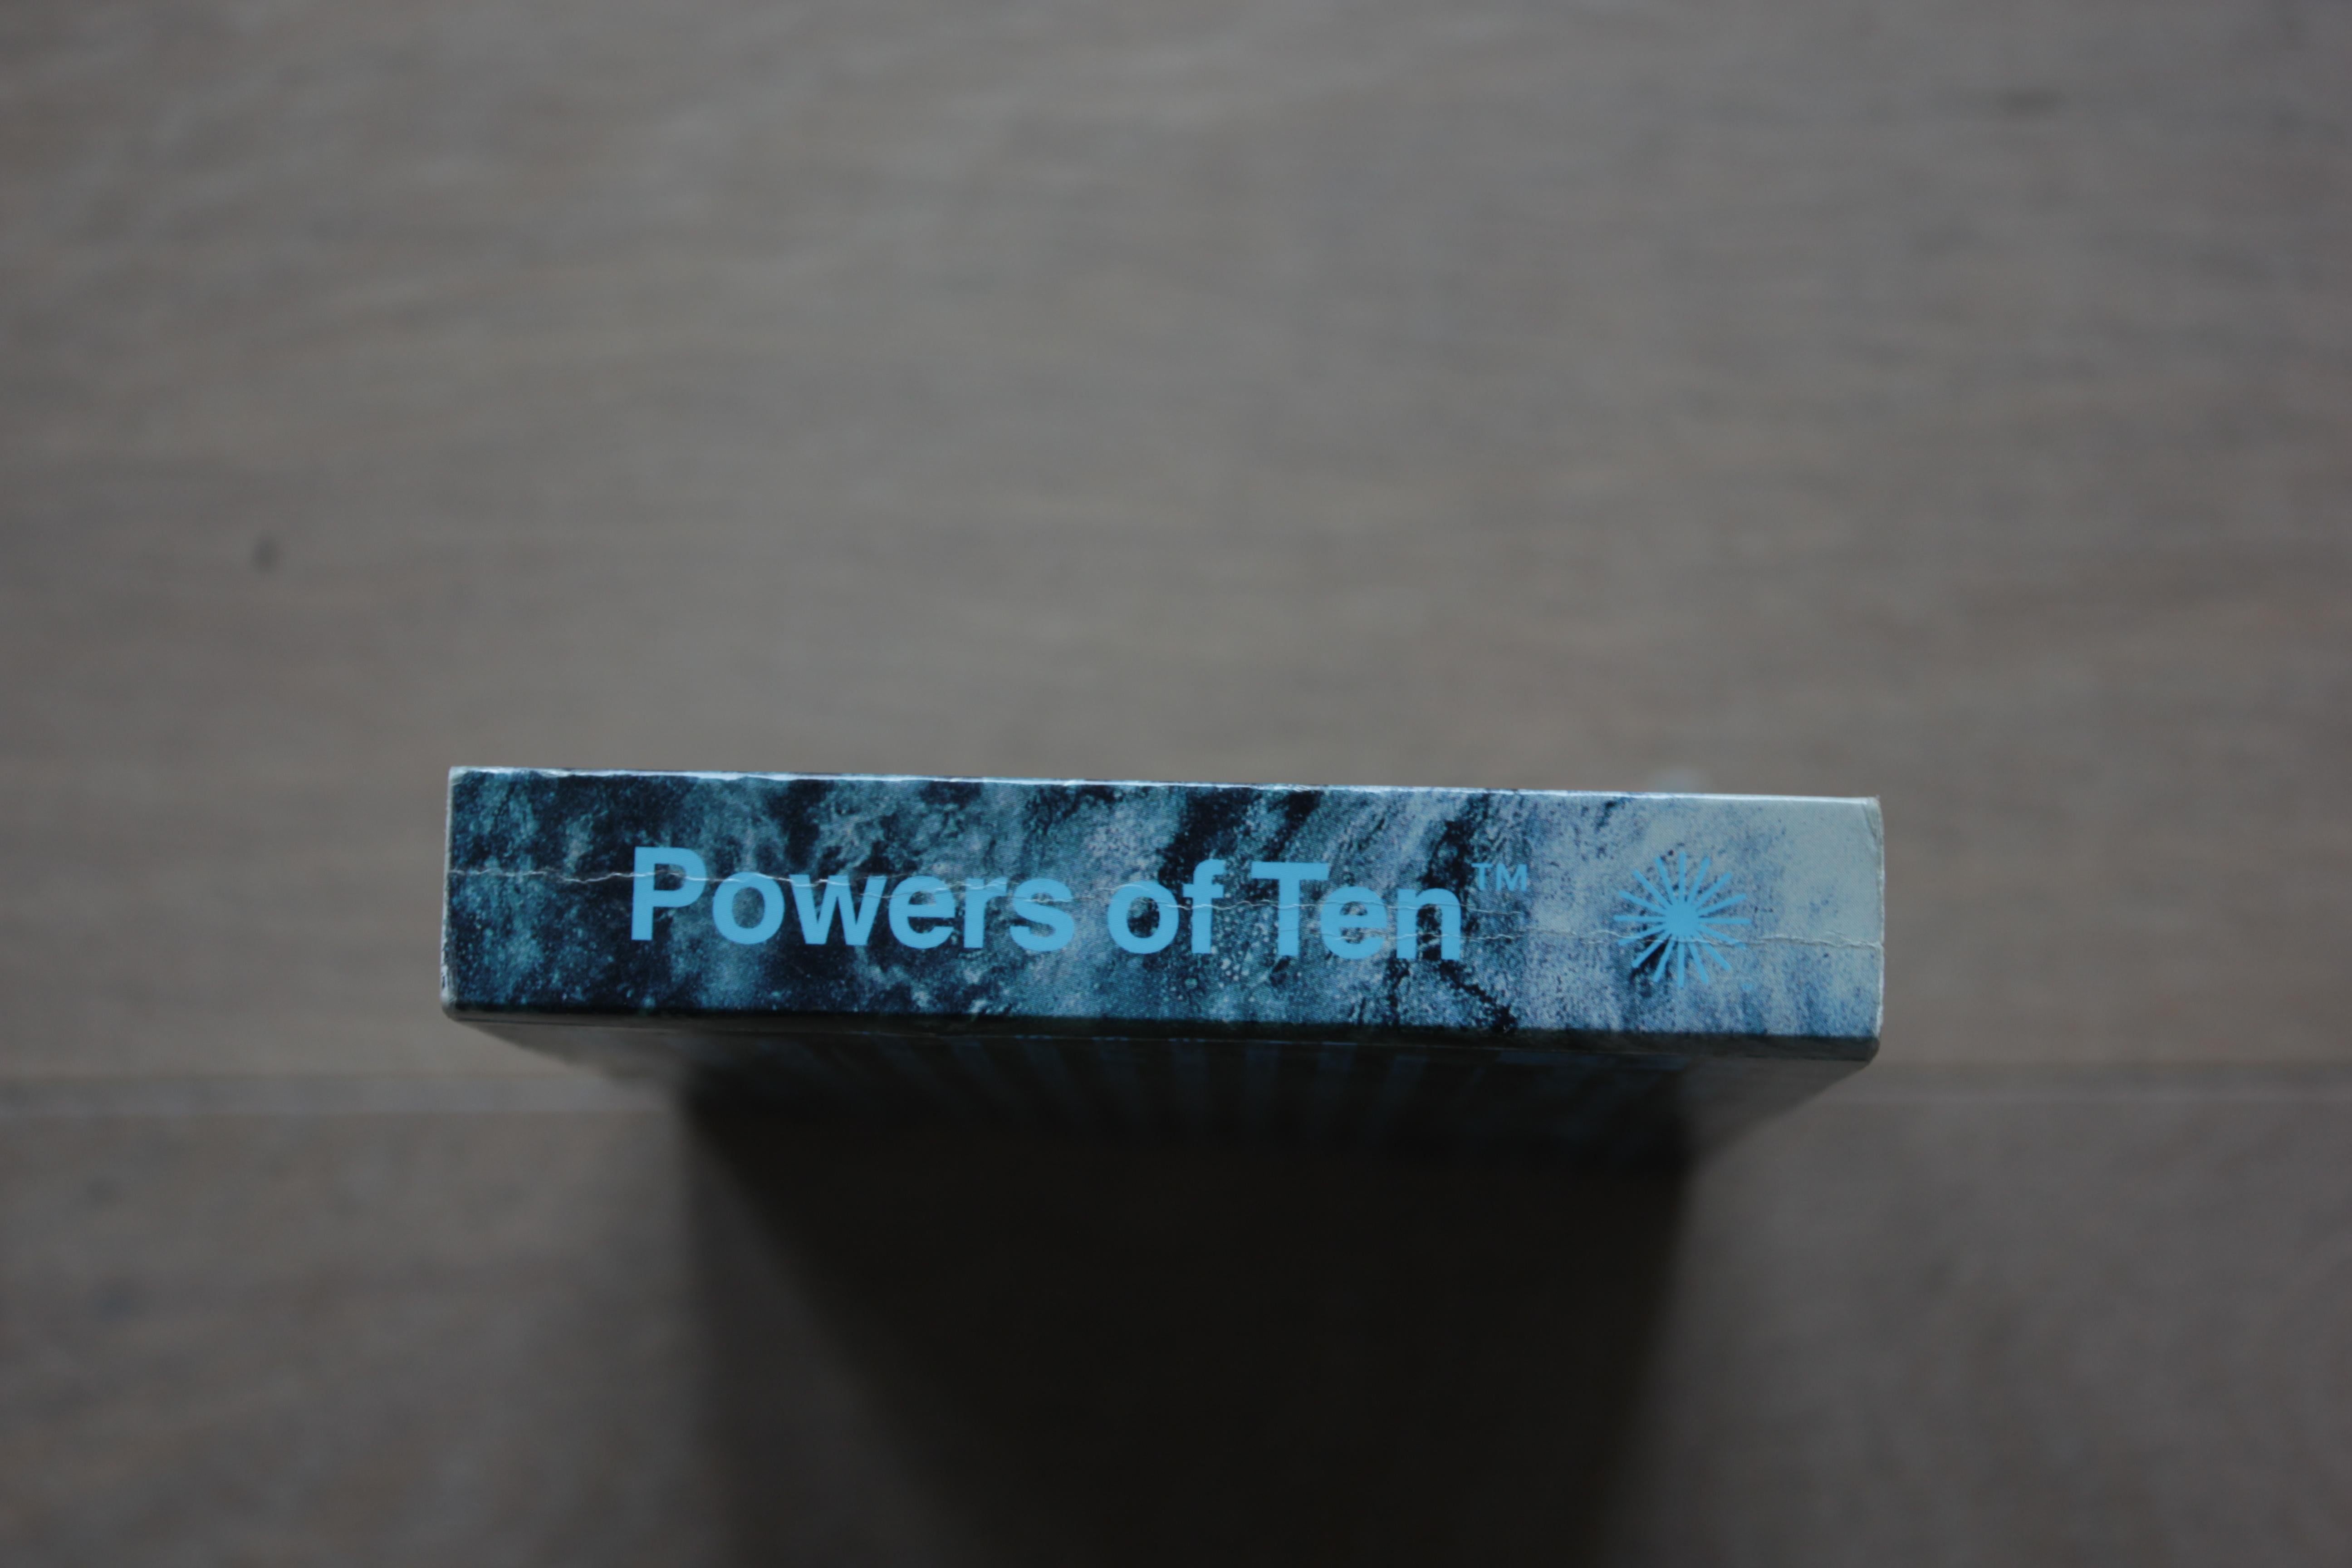 American Powers of Ten: A Flipbook, Charles and Ray Eames, Coffee Table Art Book